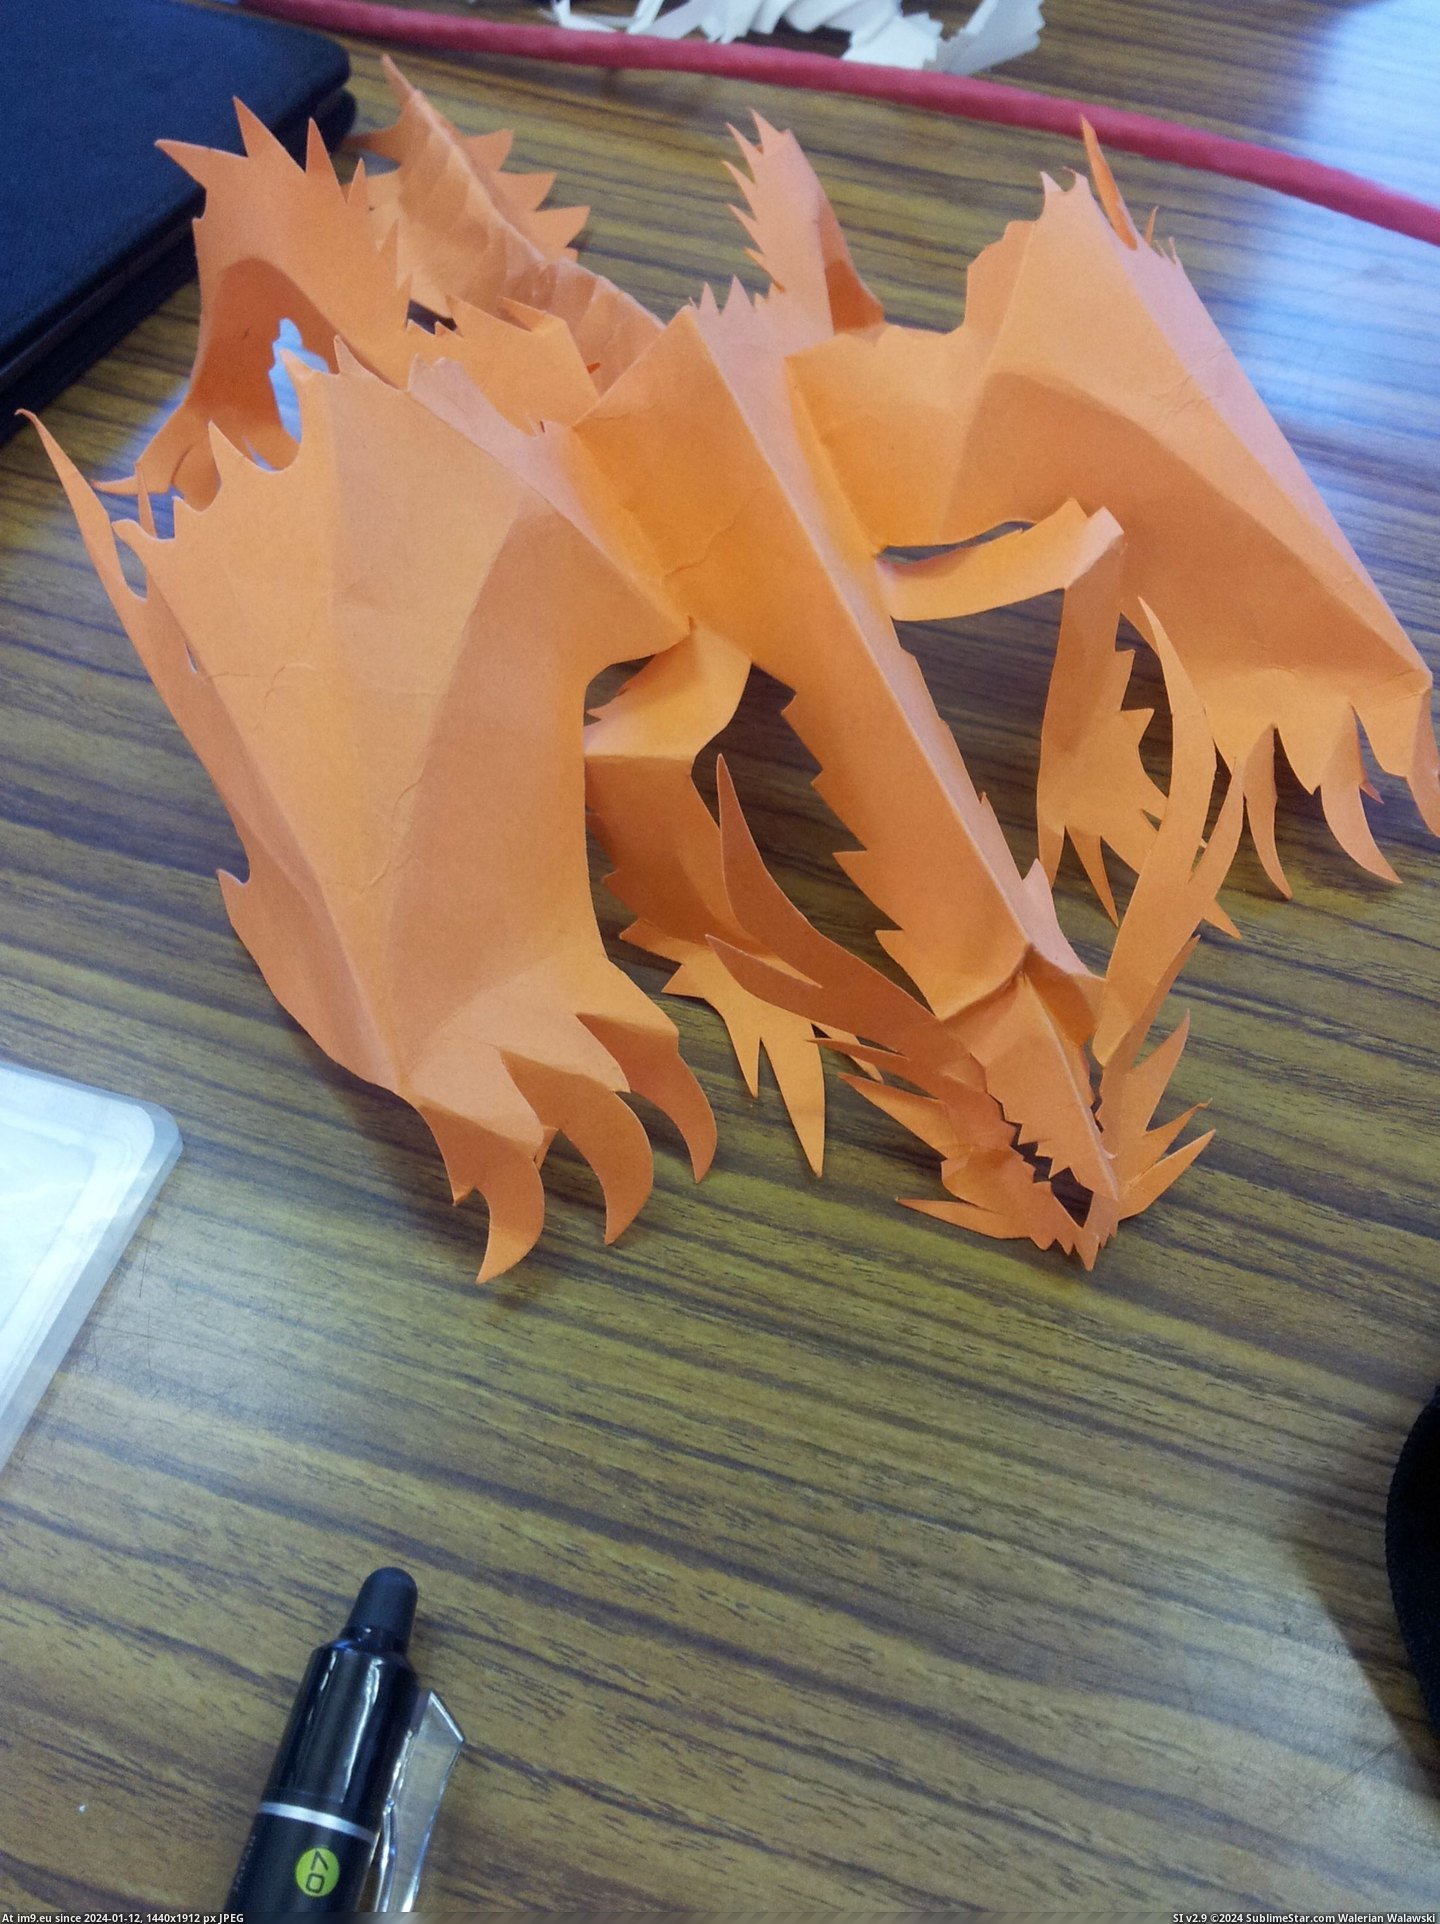 #One #Paper #Students #Creatures #Freehand #Bored #Completely [Pics] One of my students makes these creatures out of paper completely freehand whenever he is bored 10 Pic. (Изображение из альбом My r/PICS favs))